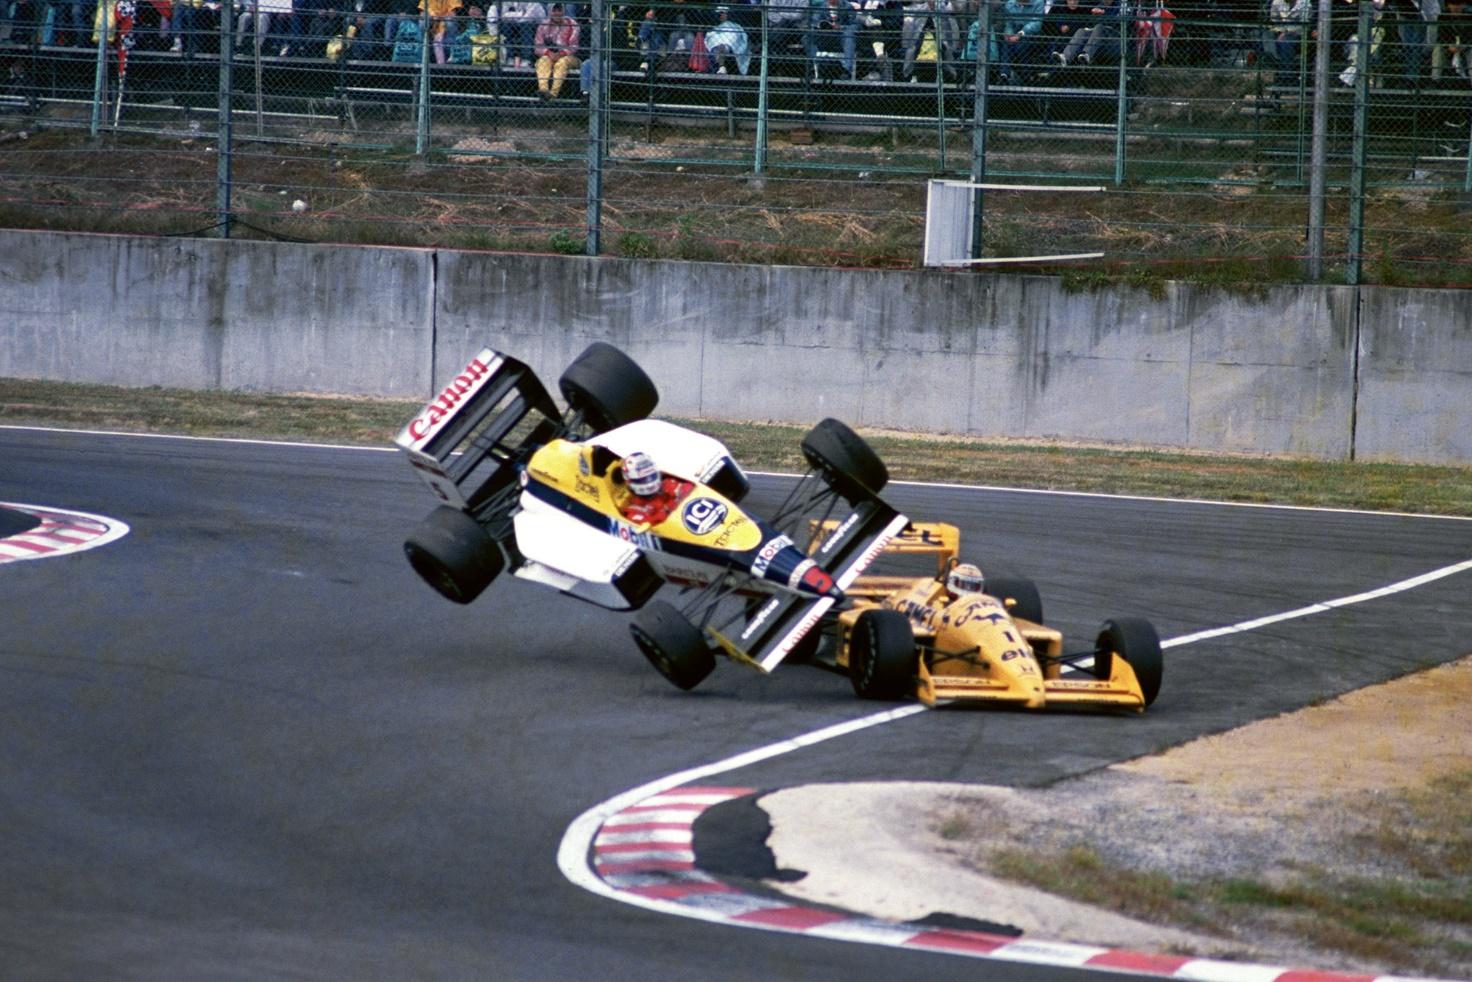 Nelson Piquet and Nigel Mansell clash in the 1988 Japanese Grand Prix.